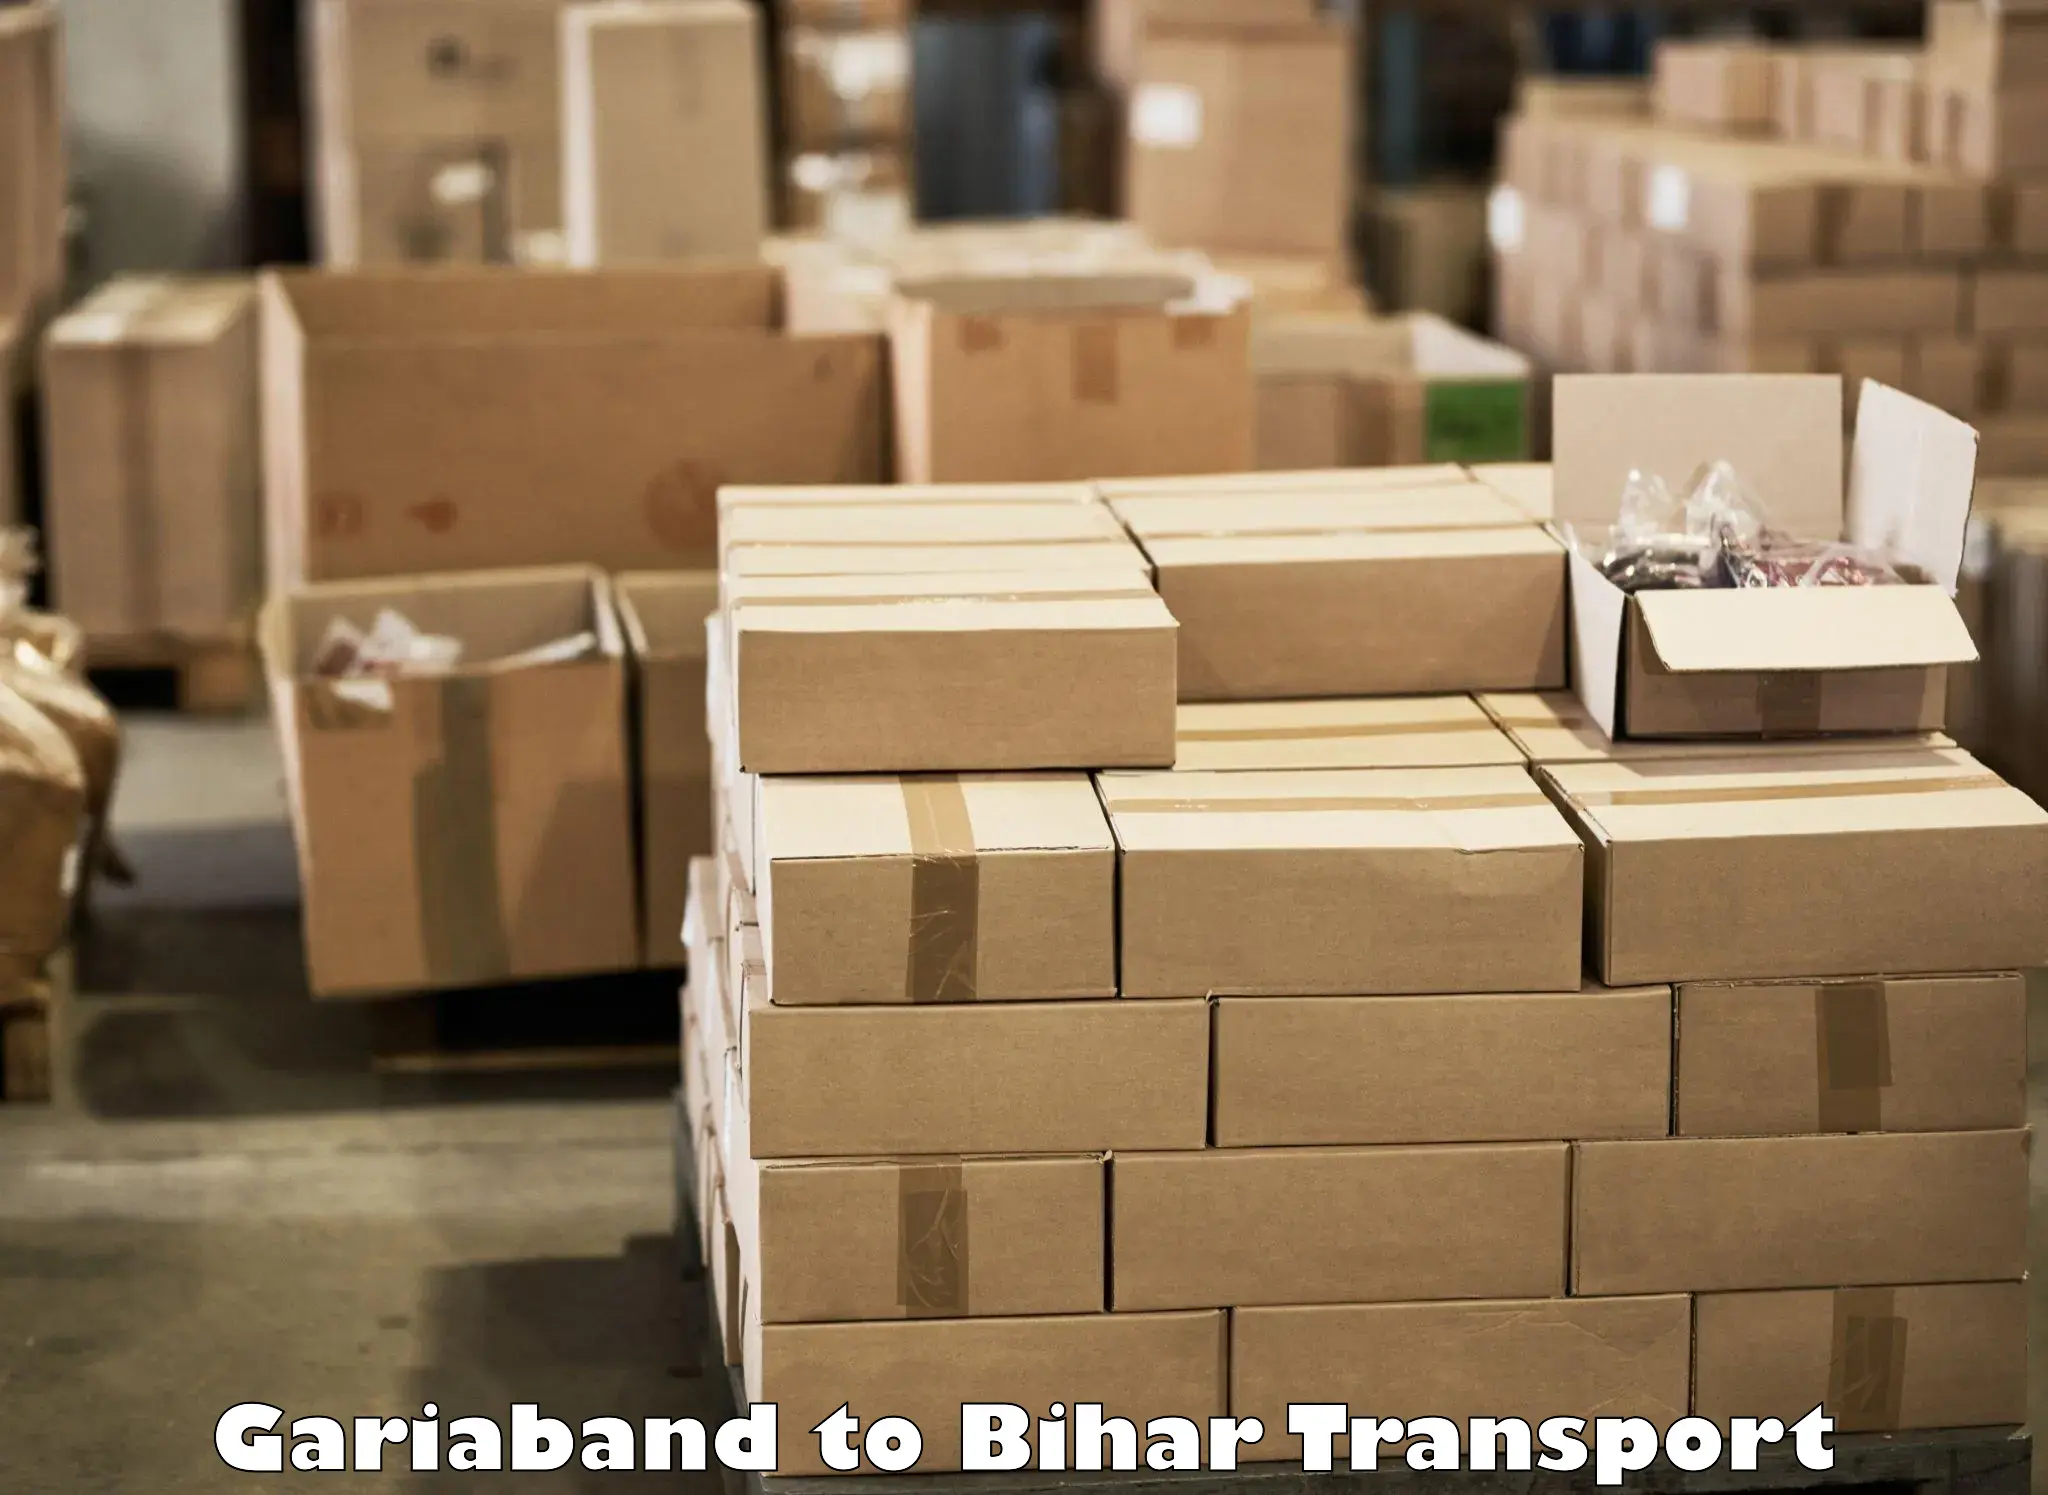 Lorry transport service Gariaband to Bhojpur